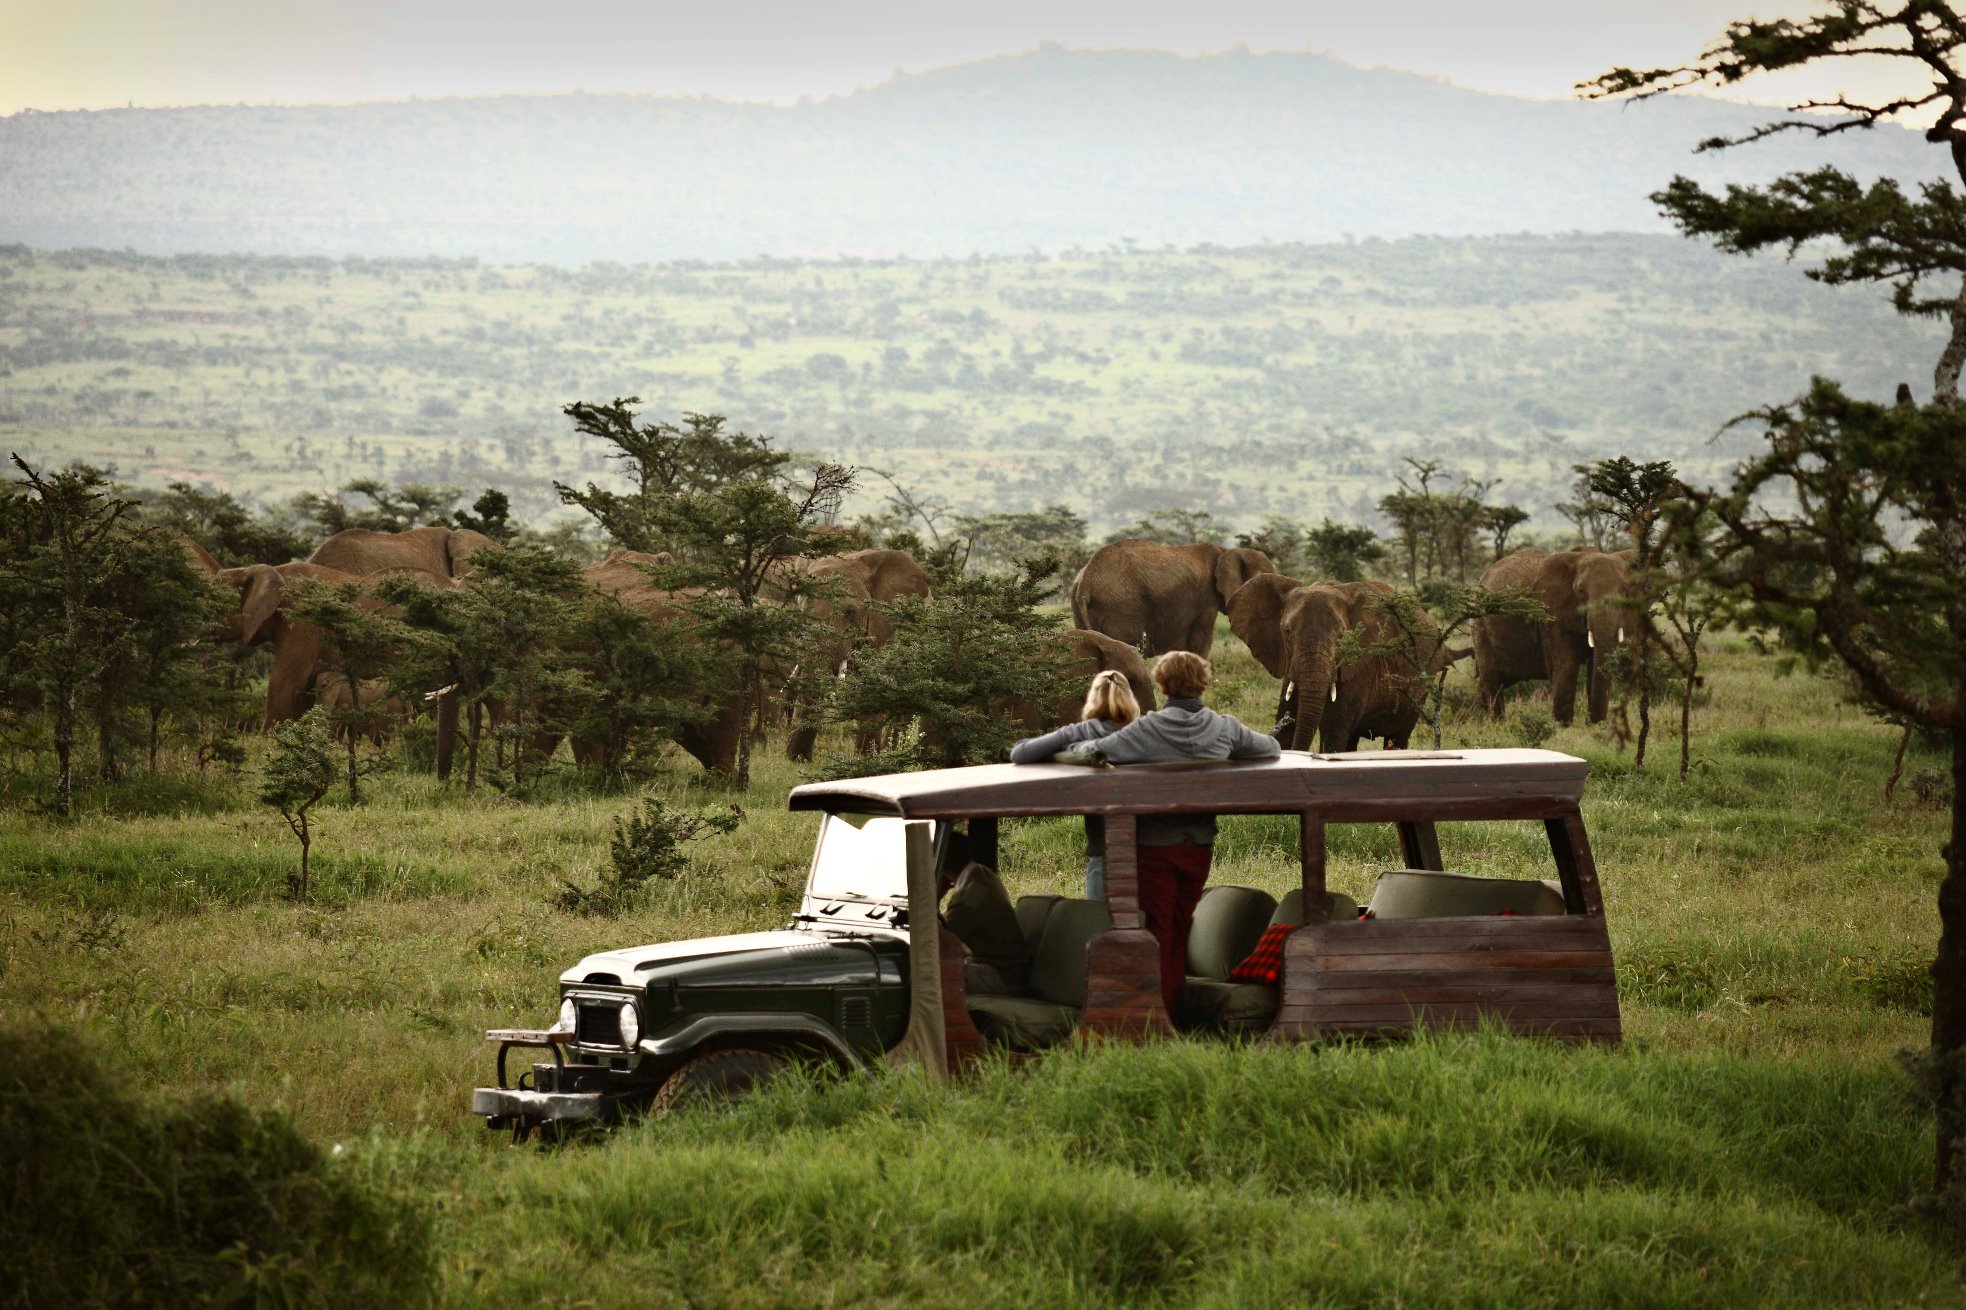 A game drive from Enasoit in Kenya